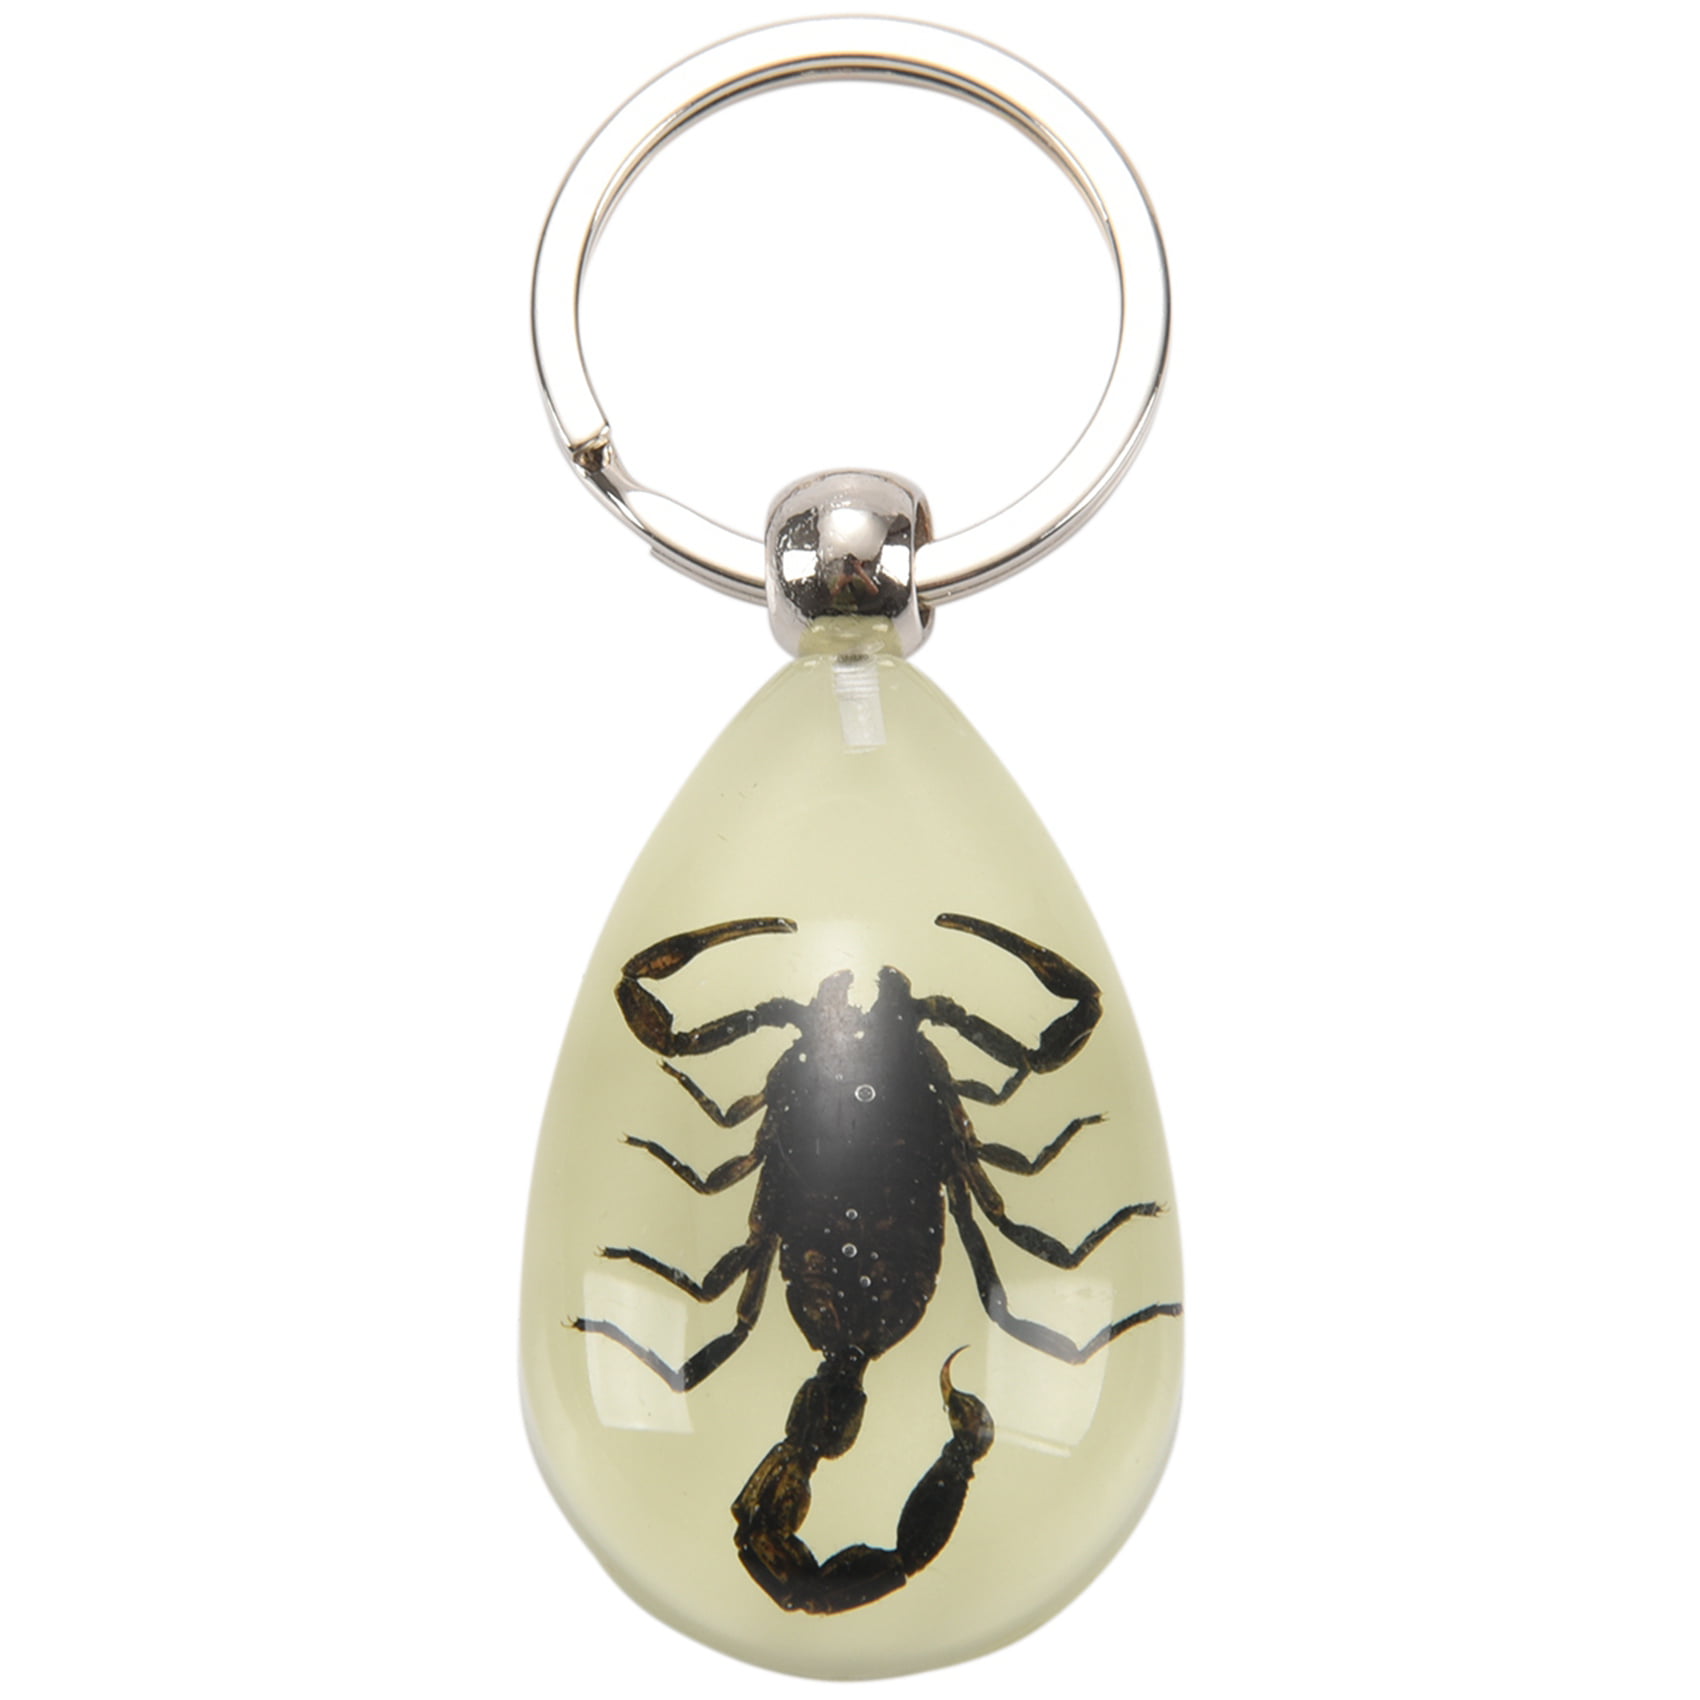 Luminous Scorpion Keychain Keyring Glow Real Insect Key Chain Ring Car Bag Tag 